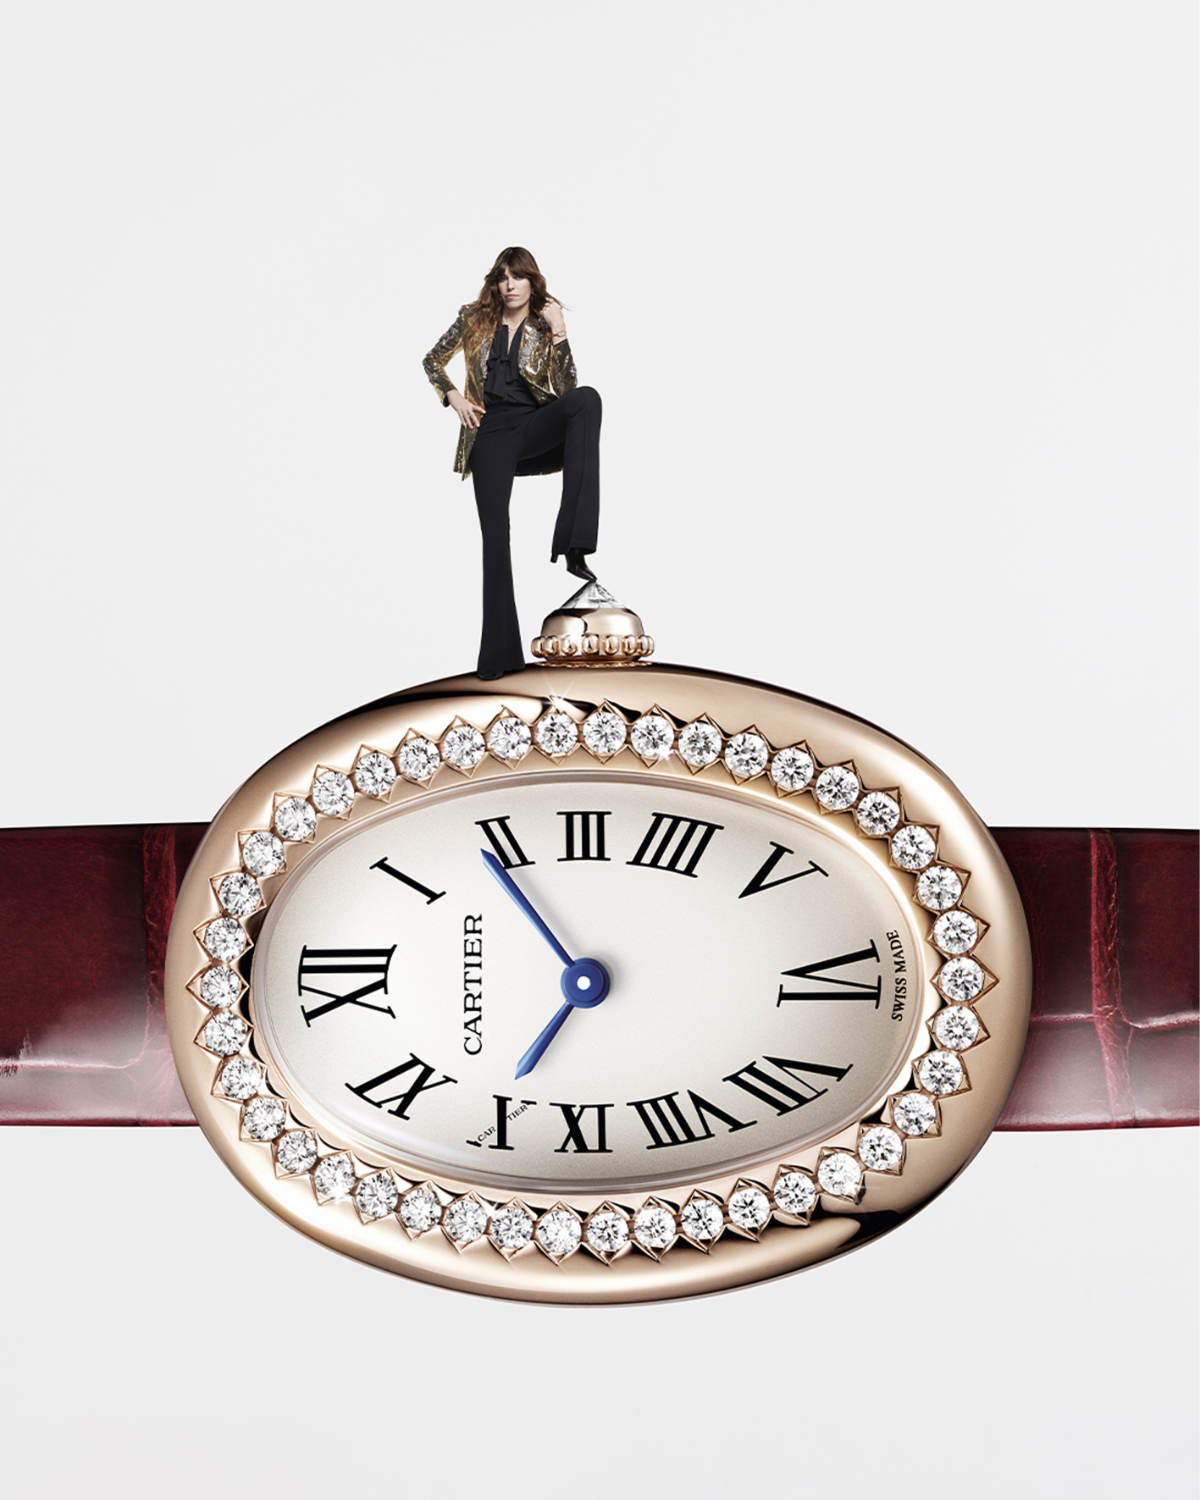 New Ratio Of Proportions Of Cartier's Iconic Baignoire Watch